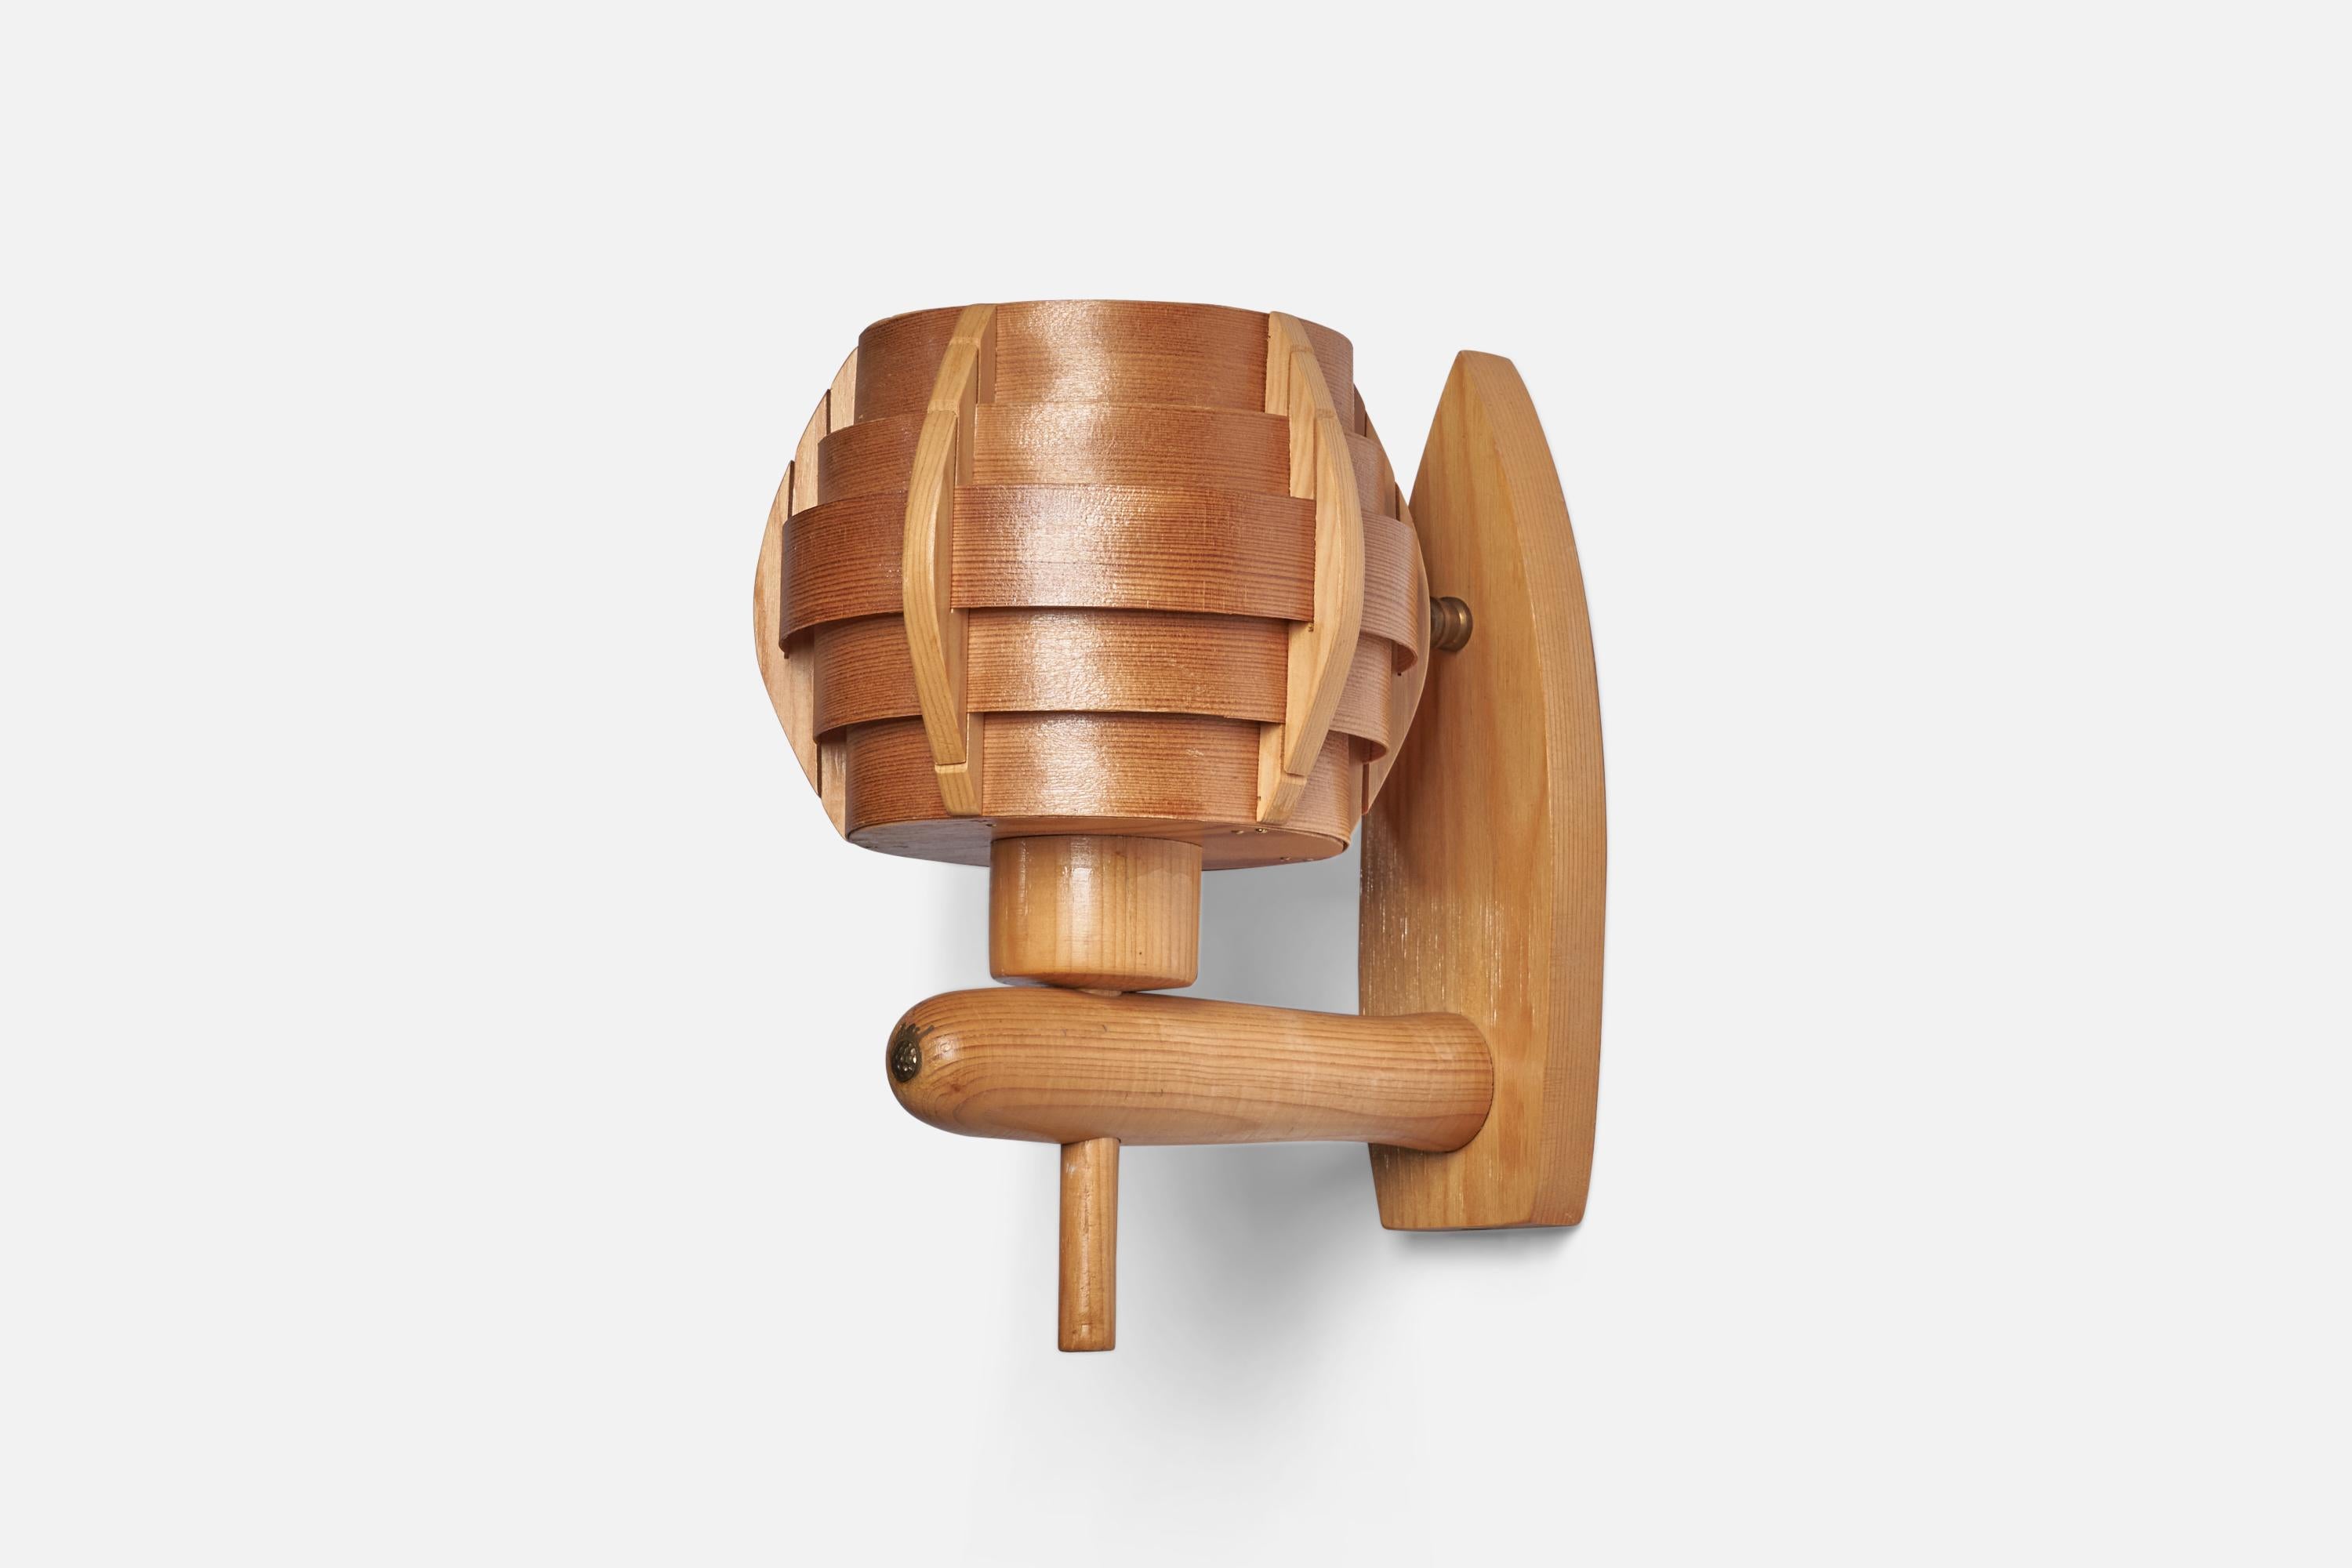 A pine and moulded pine veneer wall light, designed and produced in Sweden, 1970s.

Overall Dimensions (inches): 10